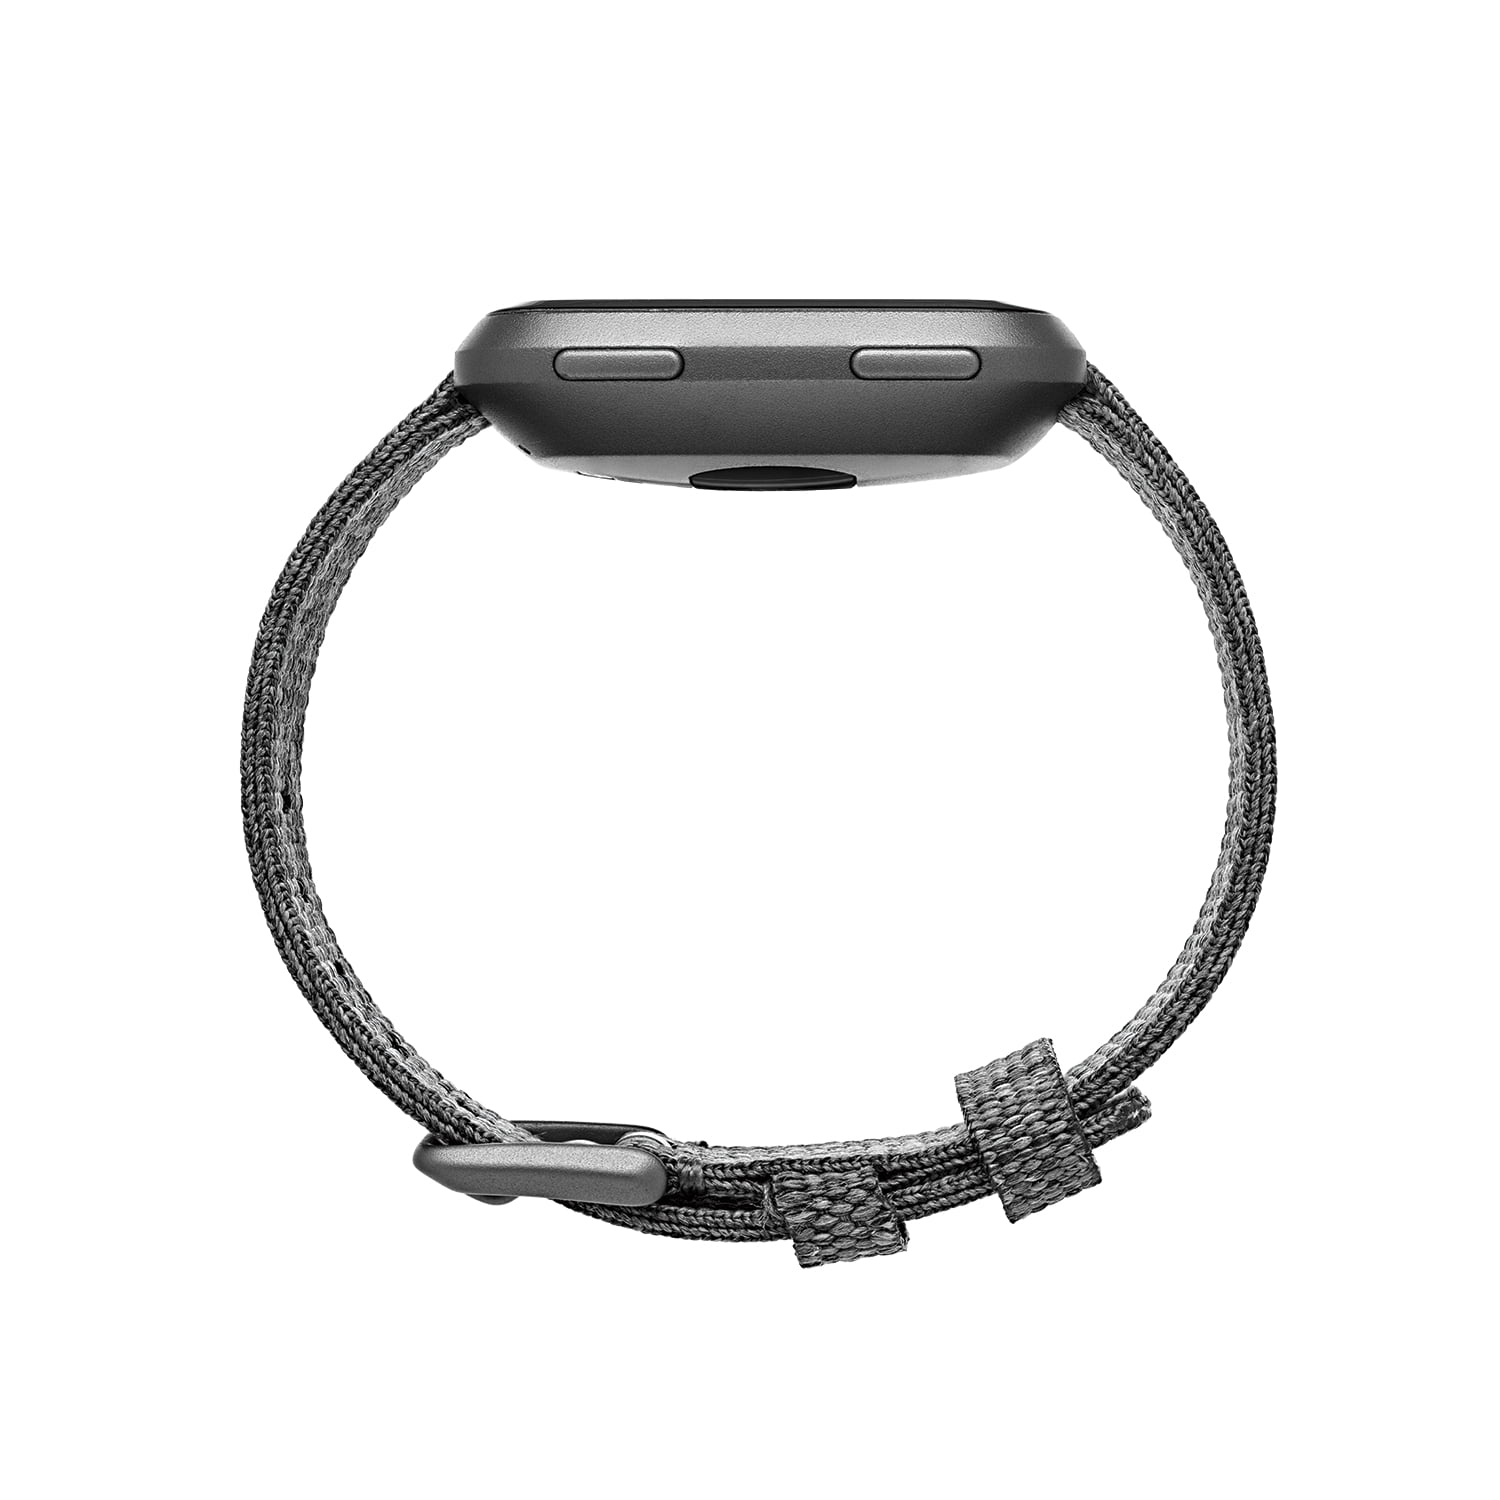 versa special edition charcoal